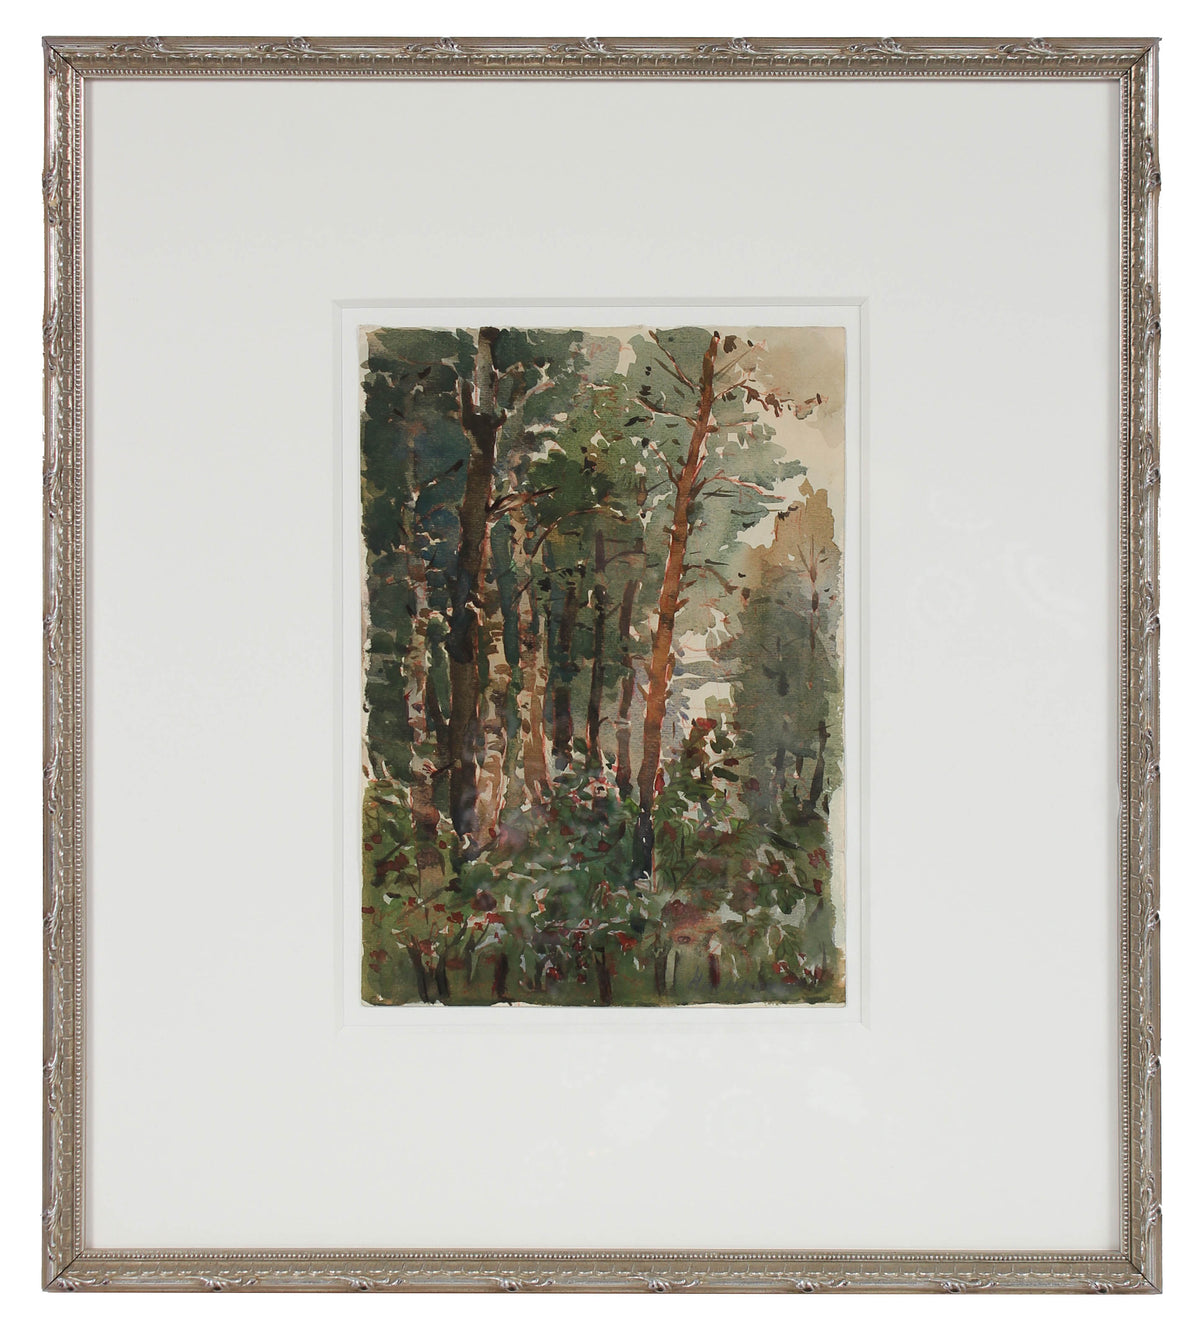 Abstracted Forest Scene&lt;br&gt;1960-80s Watercolor&lt;br&gt;Alexander Nazarenko&lt;br&gt;&lt;br&gt;#A2963